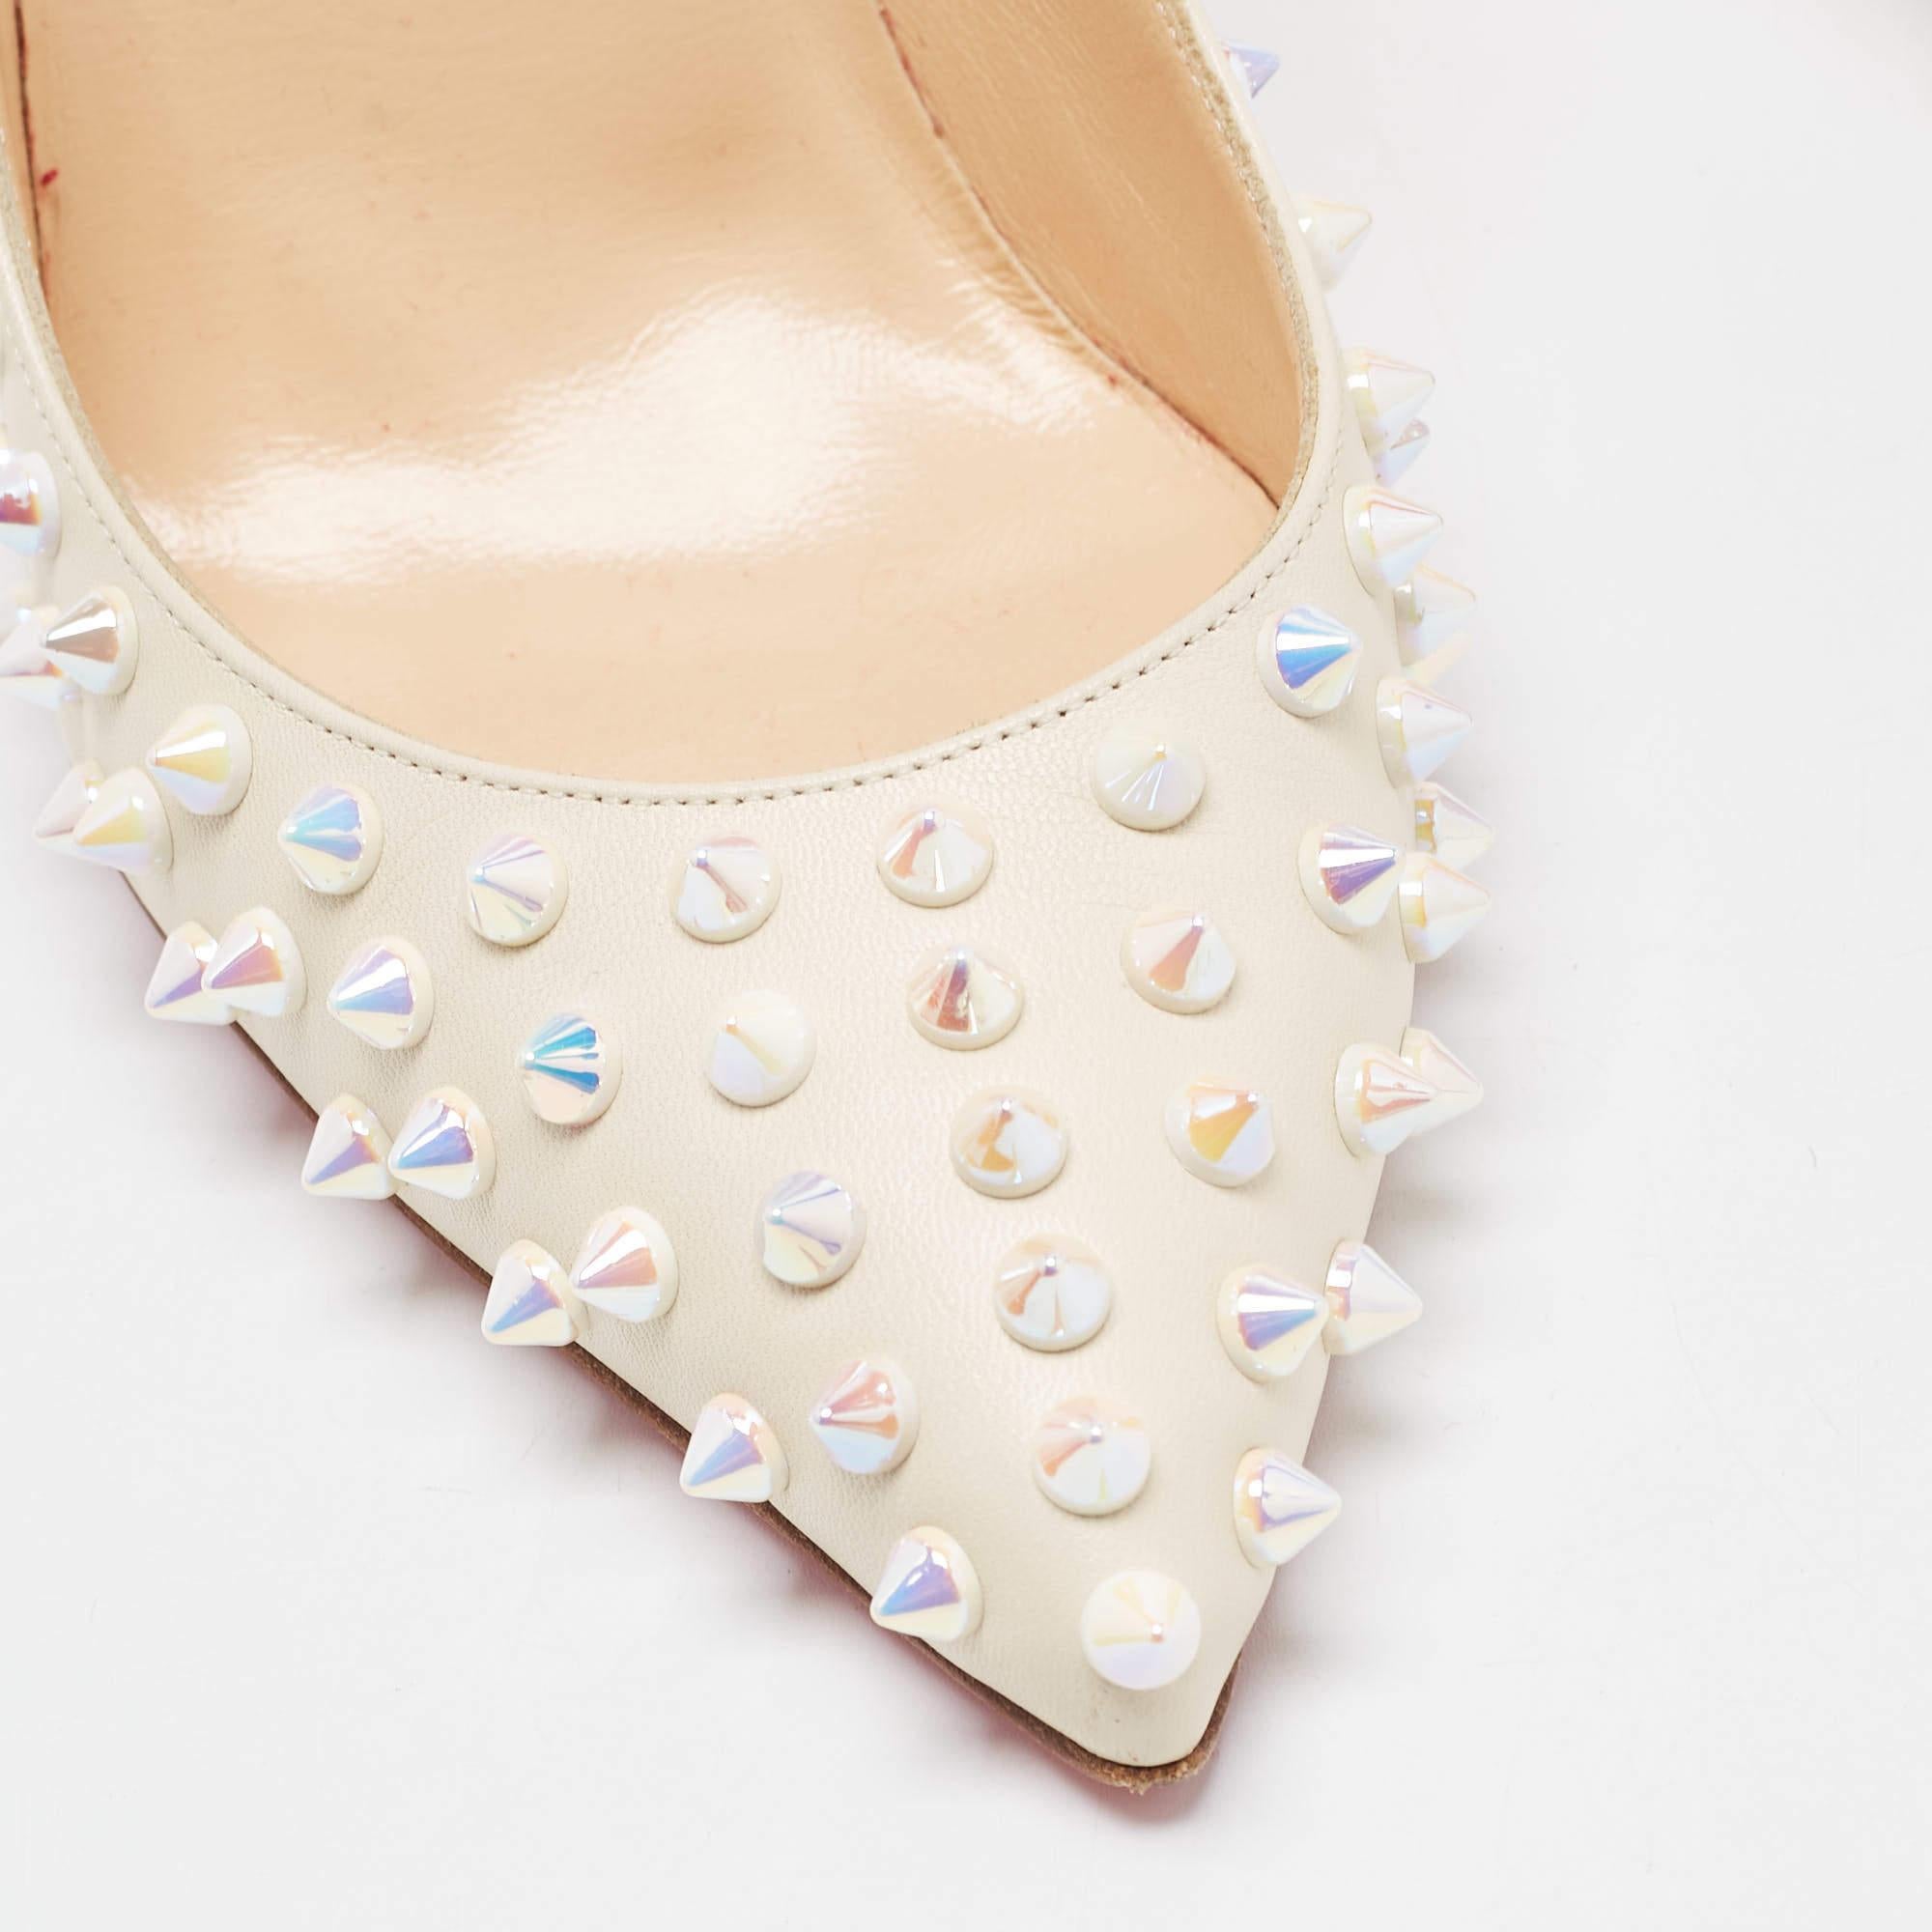 Women's Christian Louboutin Cream Leather Pigalle Spikes Pumps Size 38